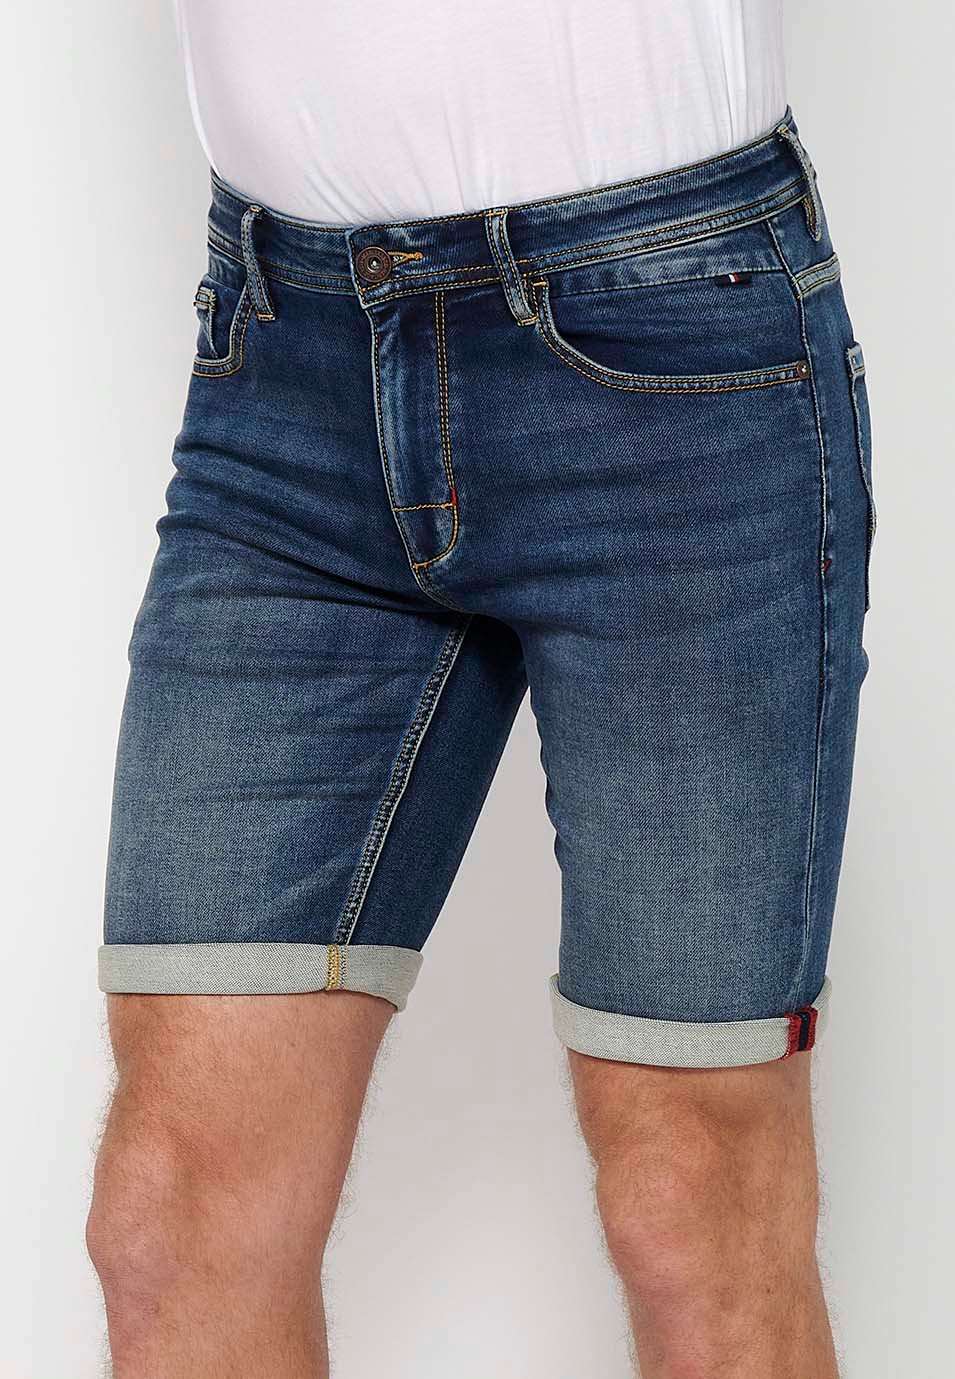 Bermuda shorts with turn-up closure with front zip and button closure in Blue for Men 3